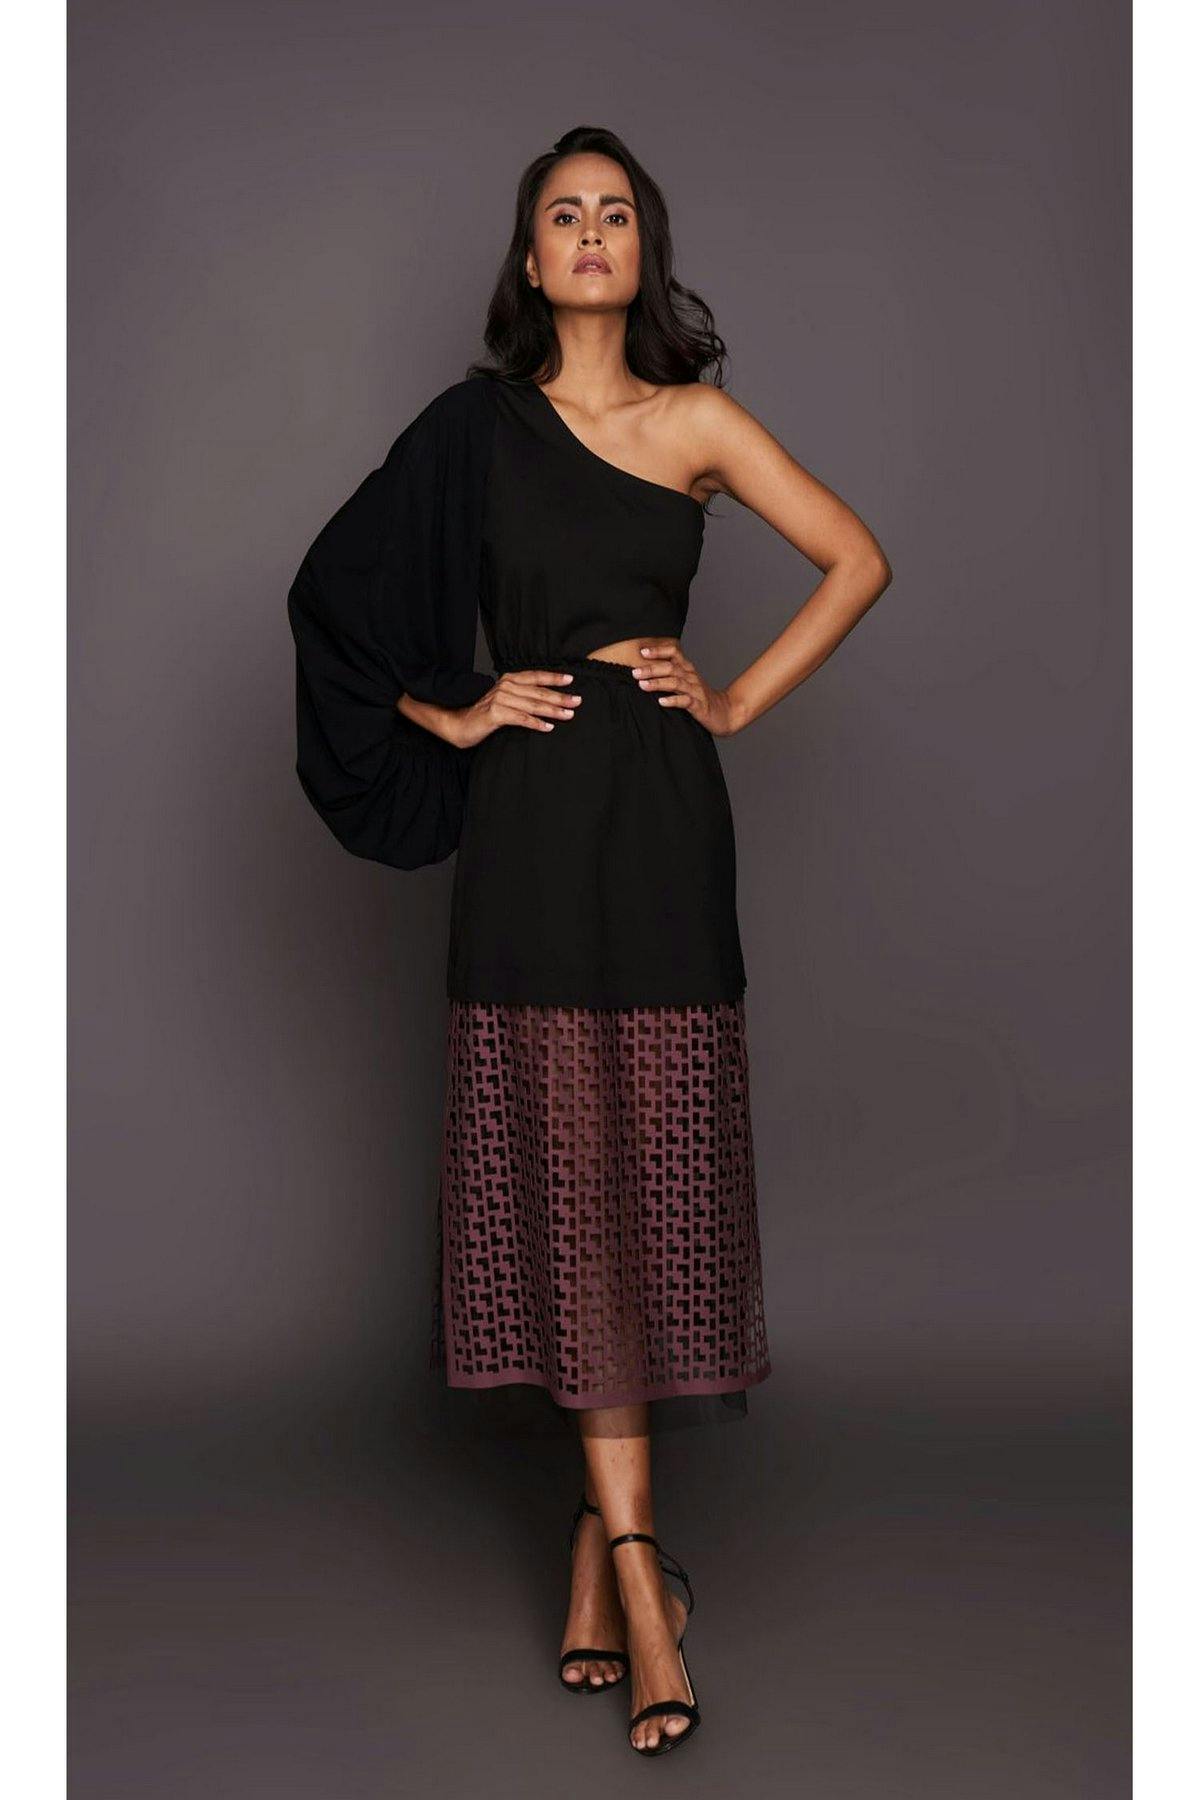 Black & wine one shoulder dress with cutwork at bottom, a product by Deepika Arora